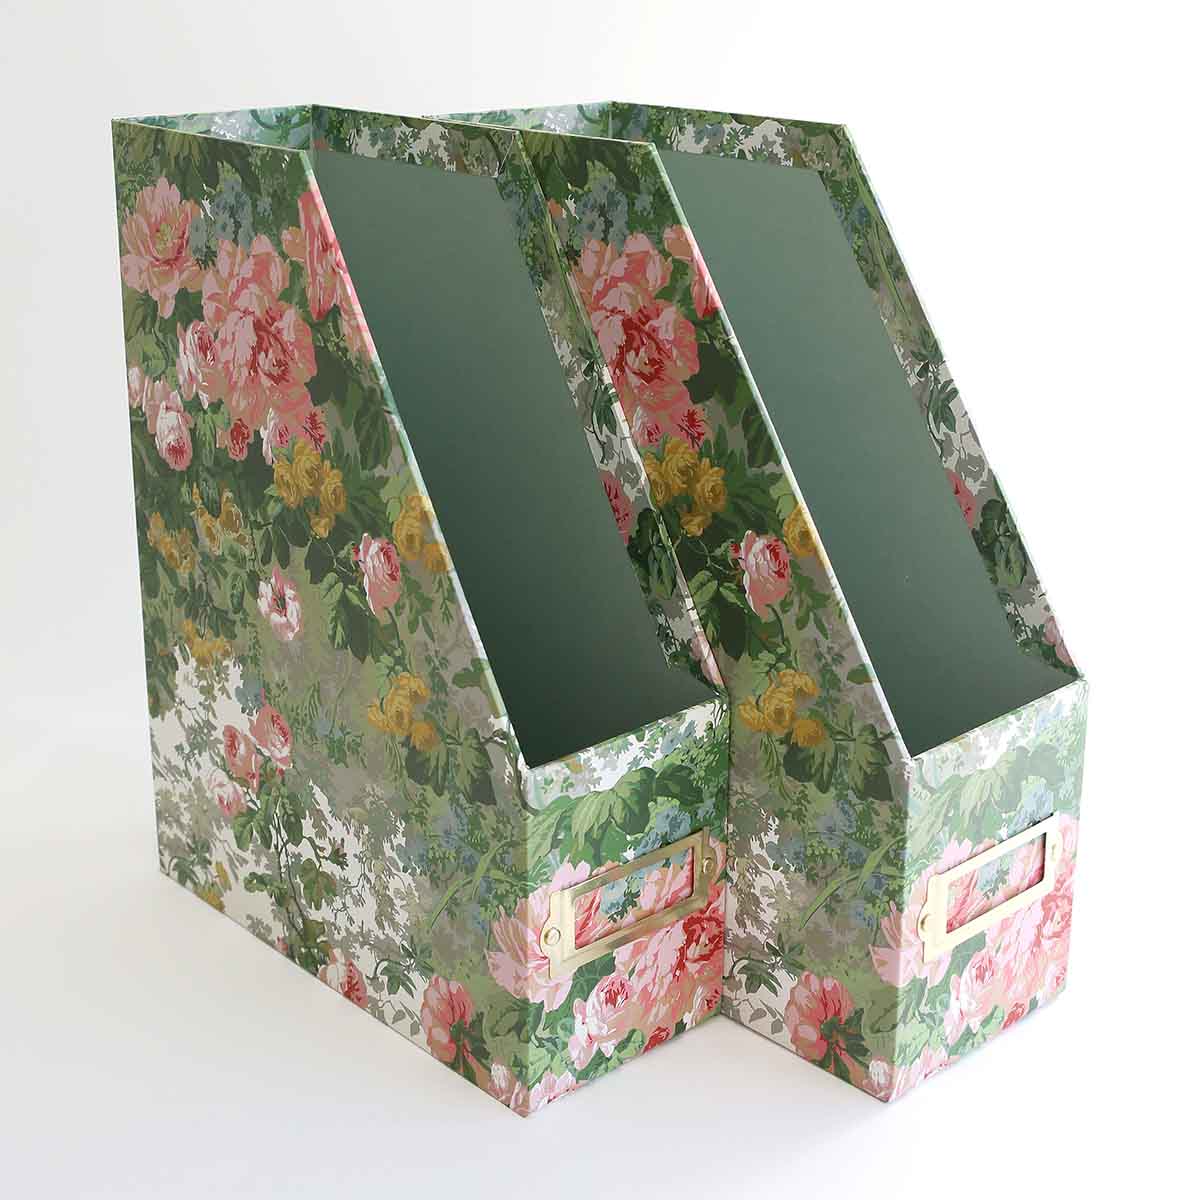 a pair of boxes with floral designs on them.